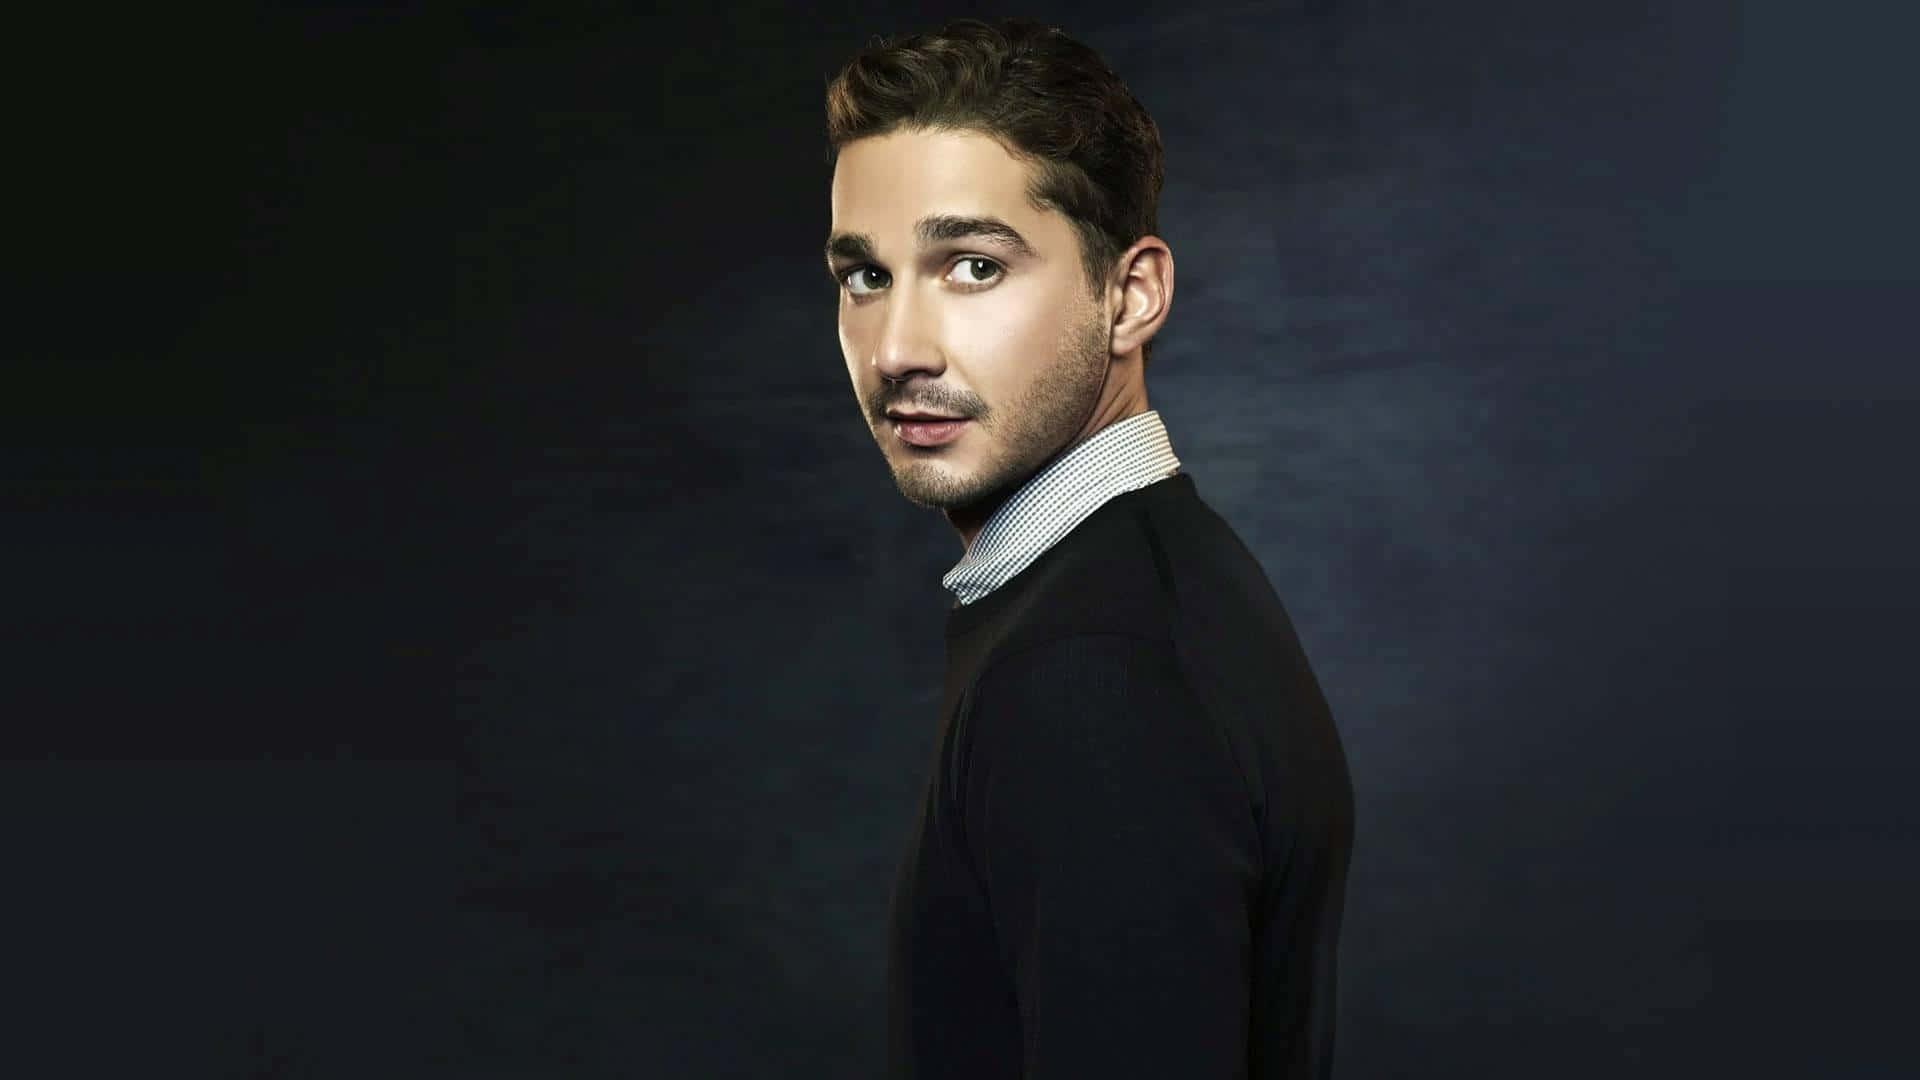 Captivating portrait of the talented actor, Shia Labeouf Wallpaper